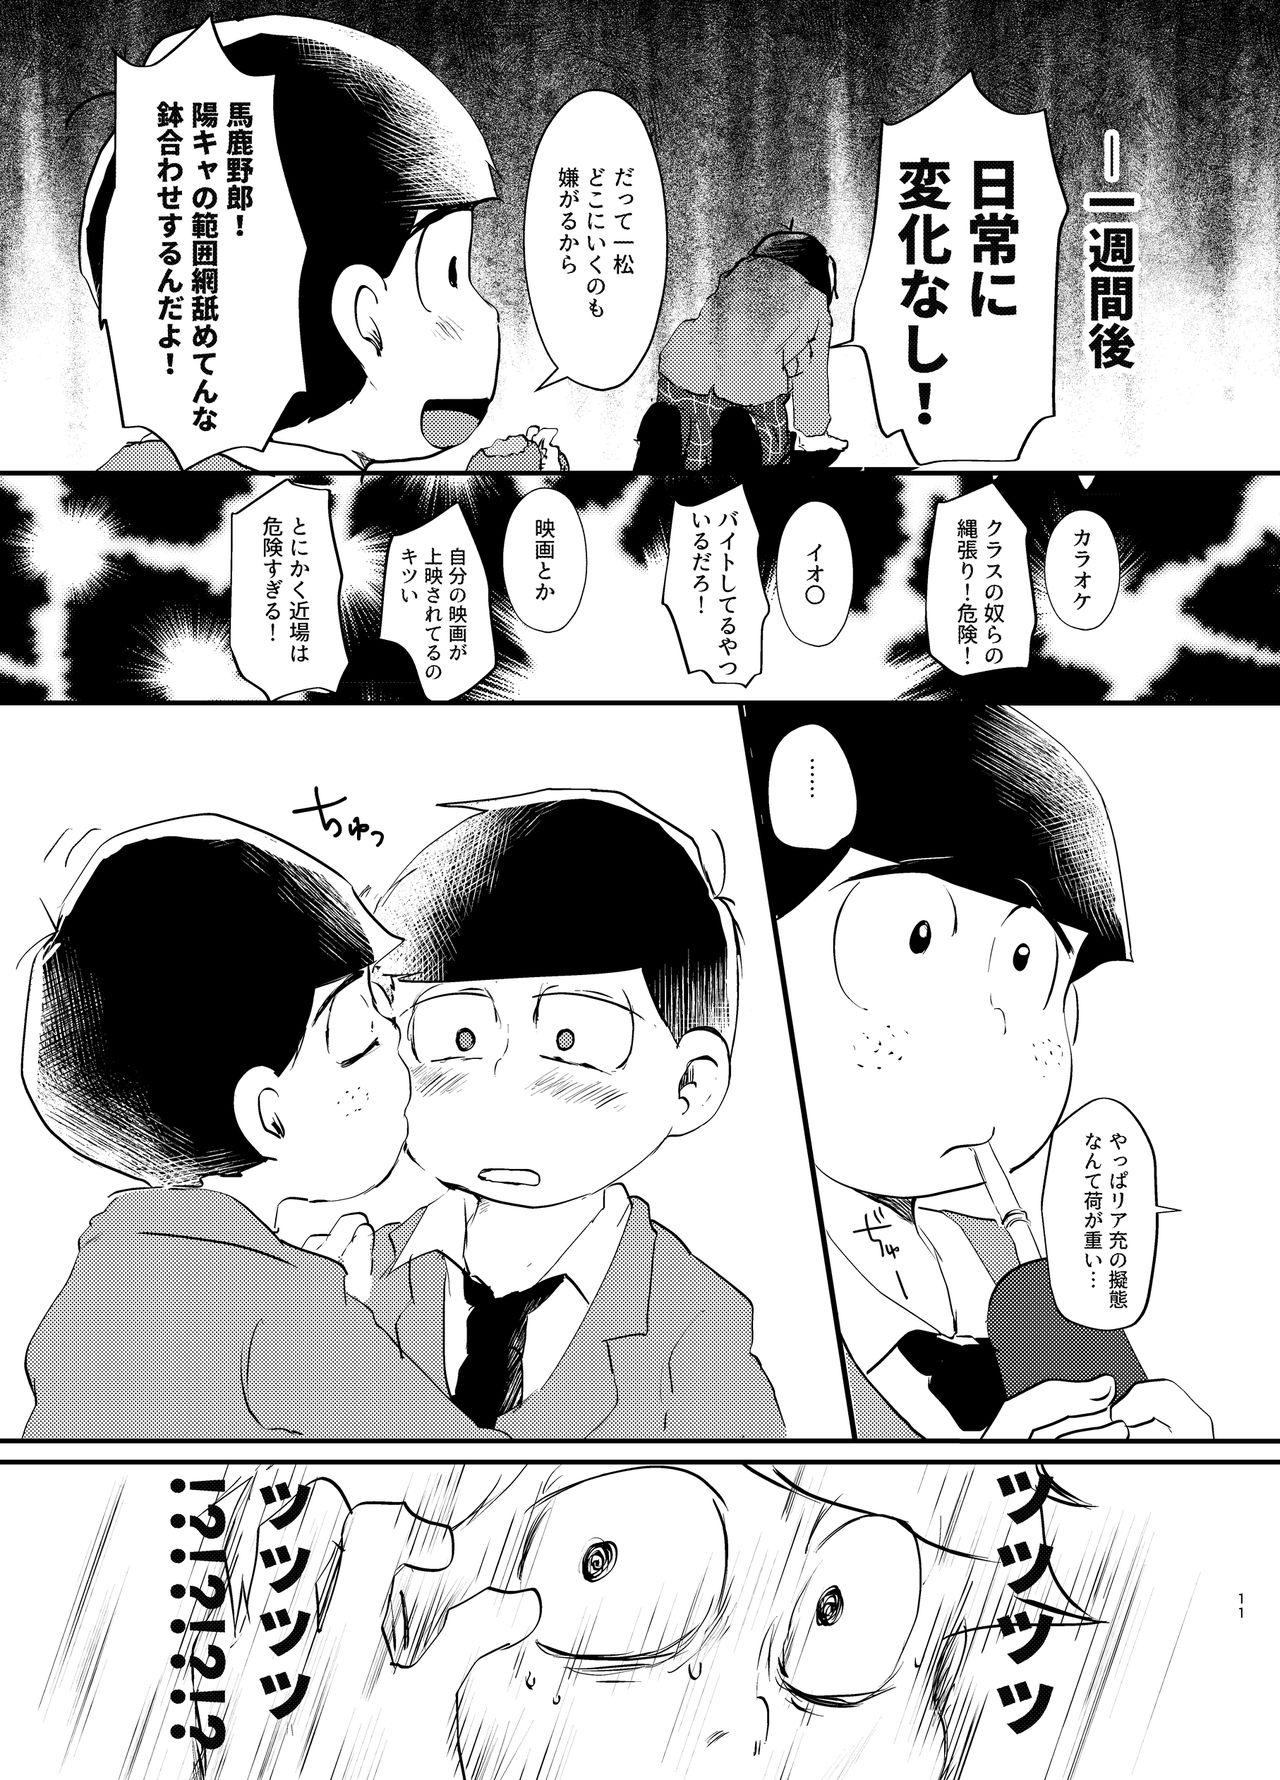 Publico Daydreaming Heroes - Osomatsu san Solo - Page 10